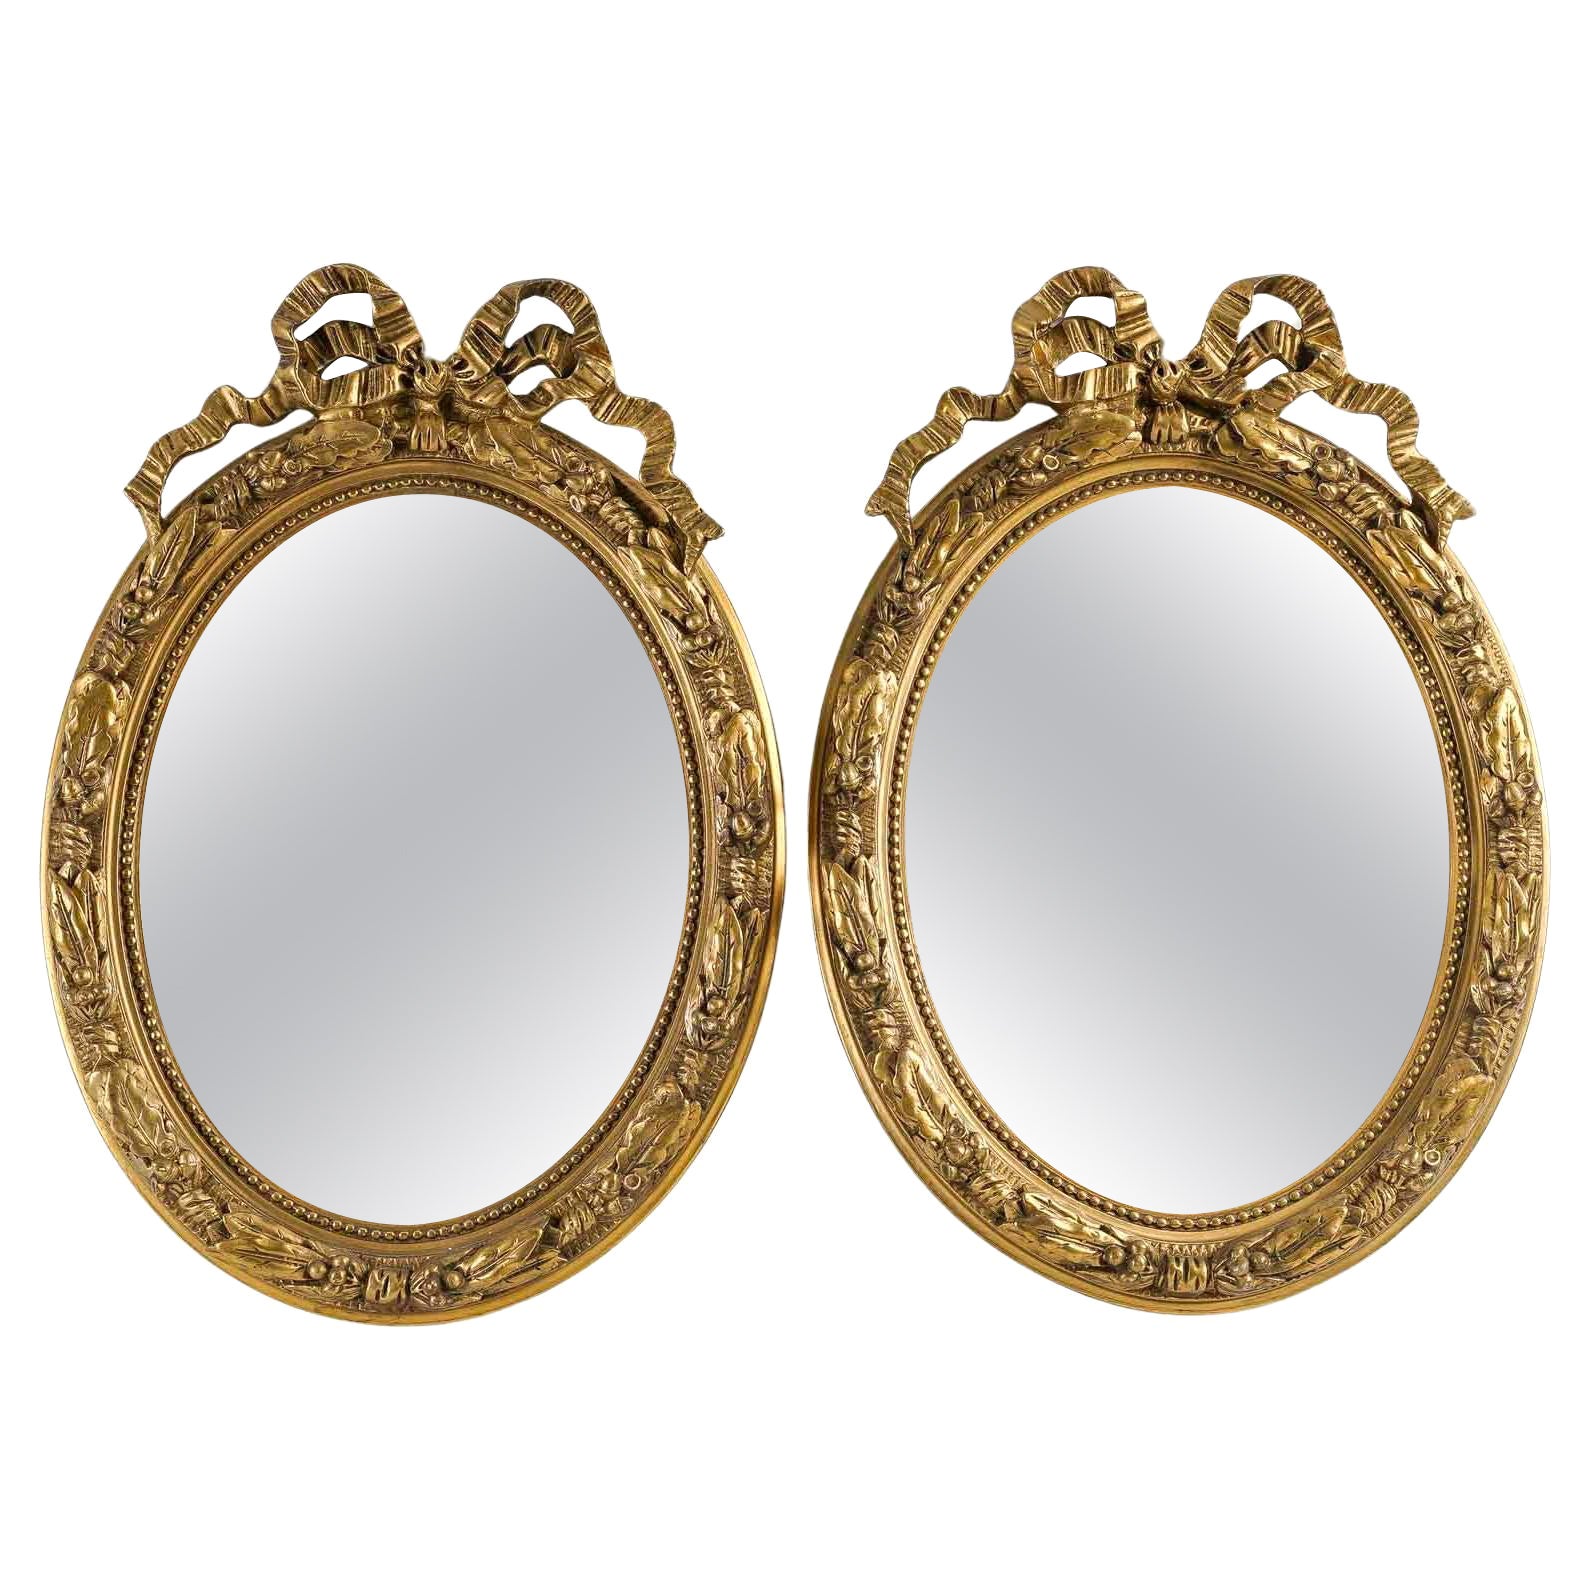 Pair of Louis XVI Style Wood and Gilded Stucco Mirrors, Early 20th Century. For Sale